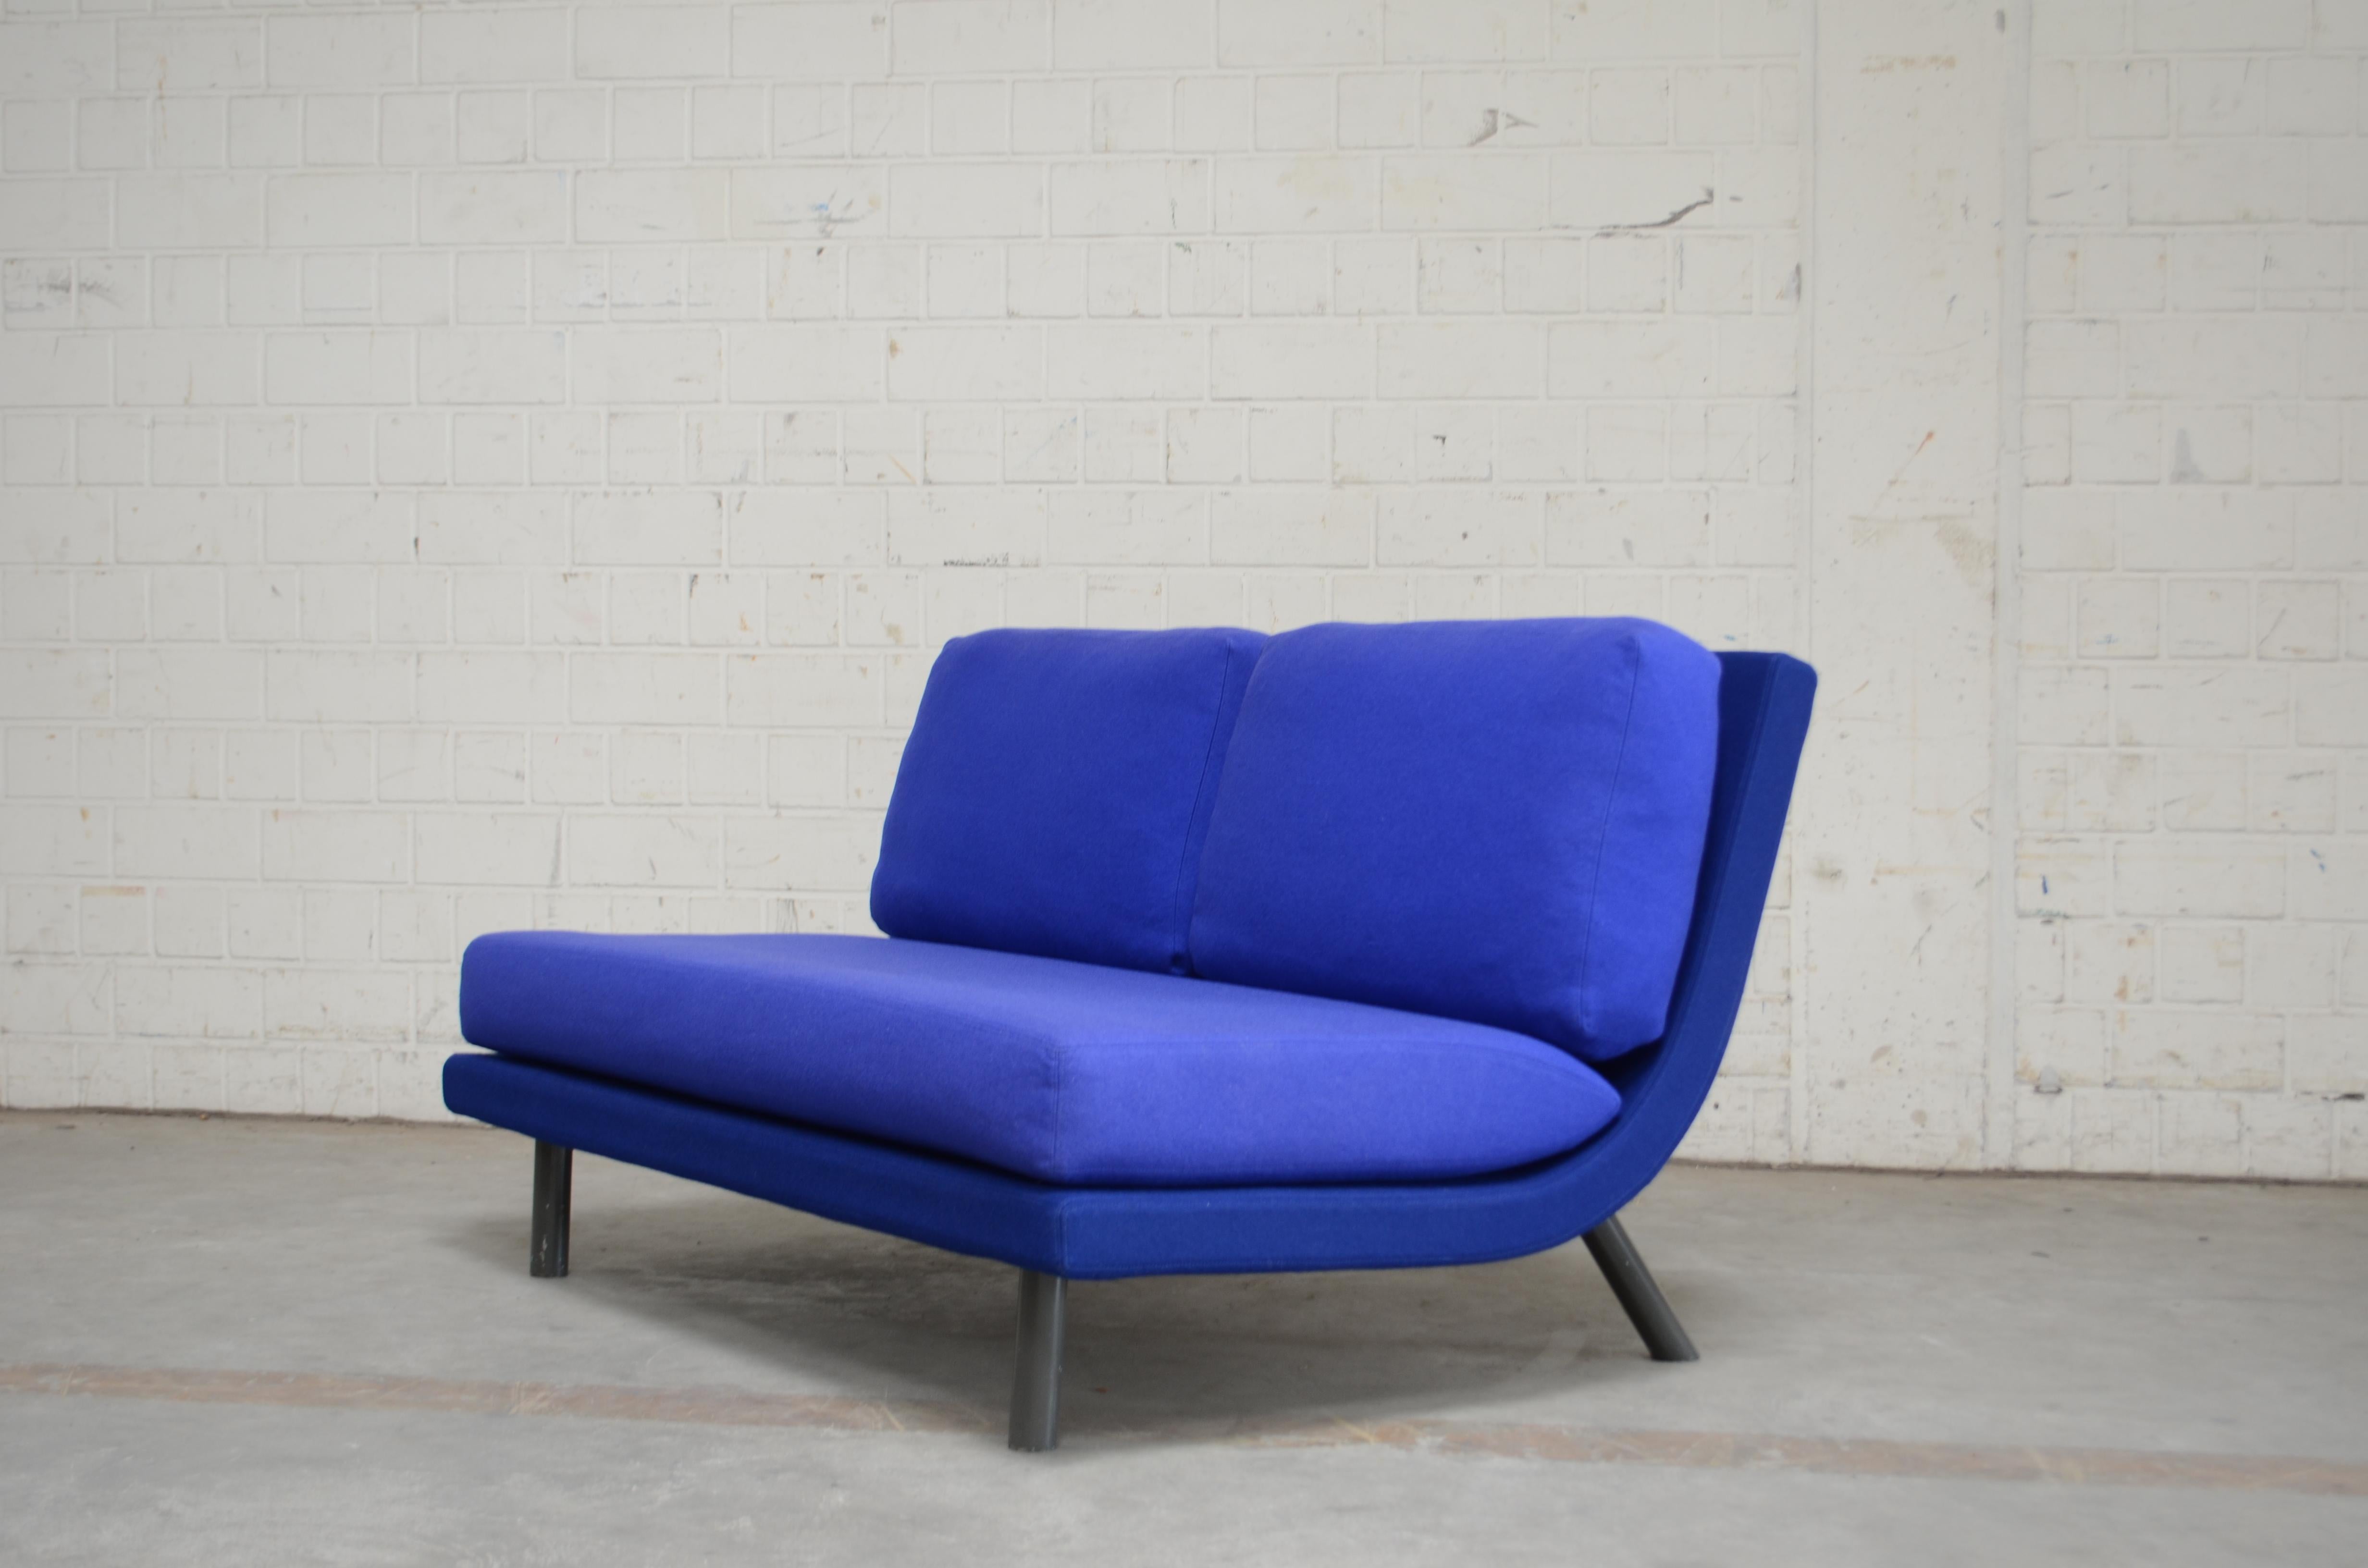 A rare and unique prototype from David Chipperfield for Interlübke.
This sofa comes straight from the office of David Chipperfield.
It was a gift from David Chipperfield to a German architect who had worked for him.
Chipperfield has designed this